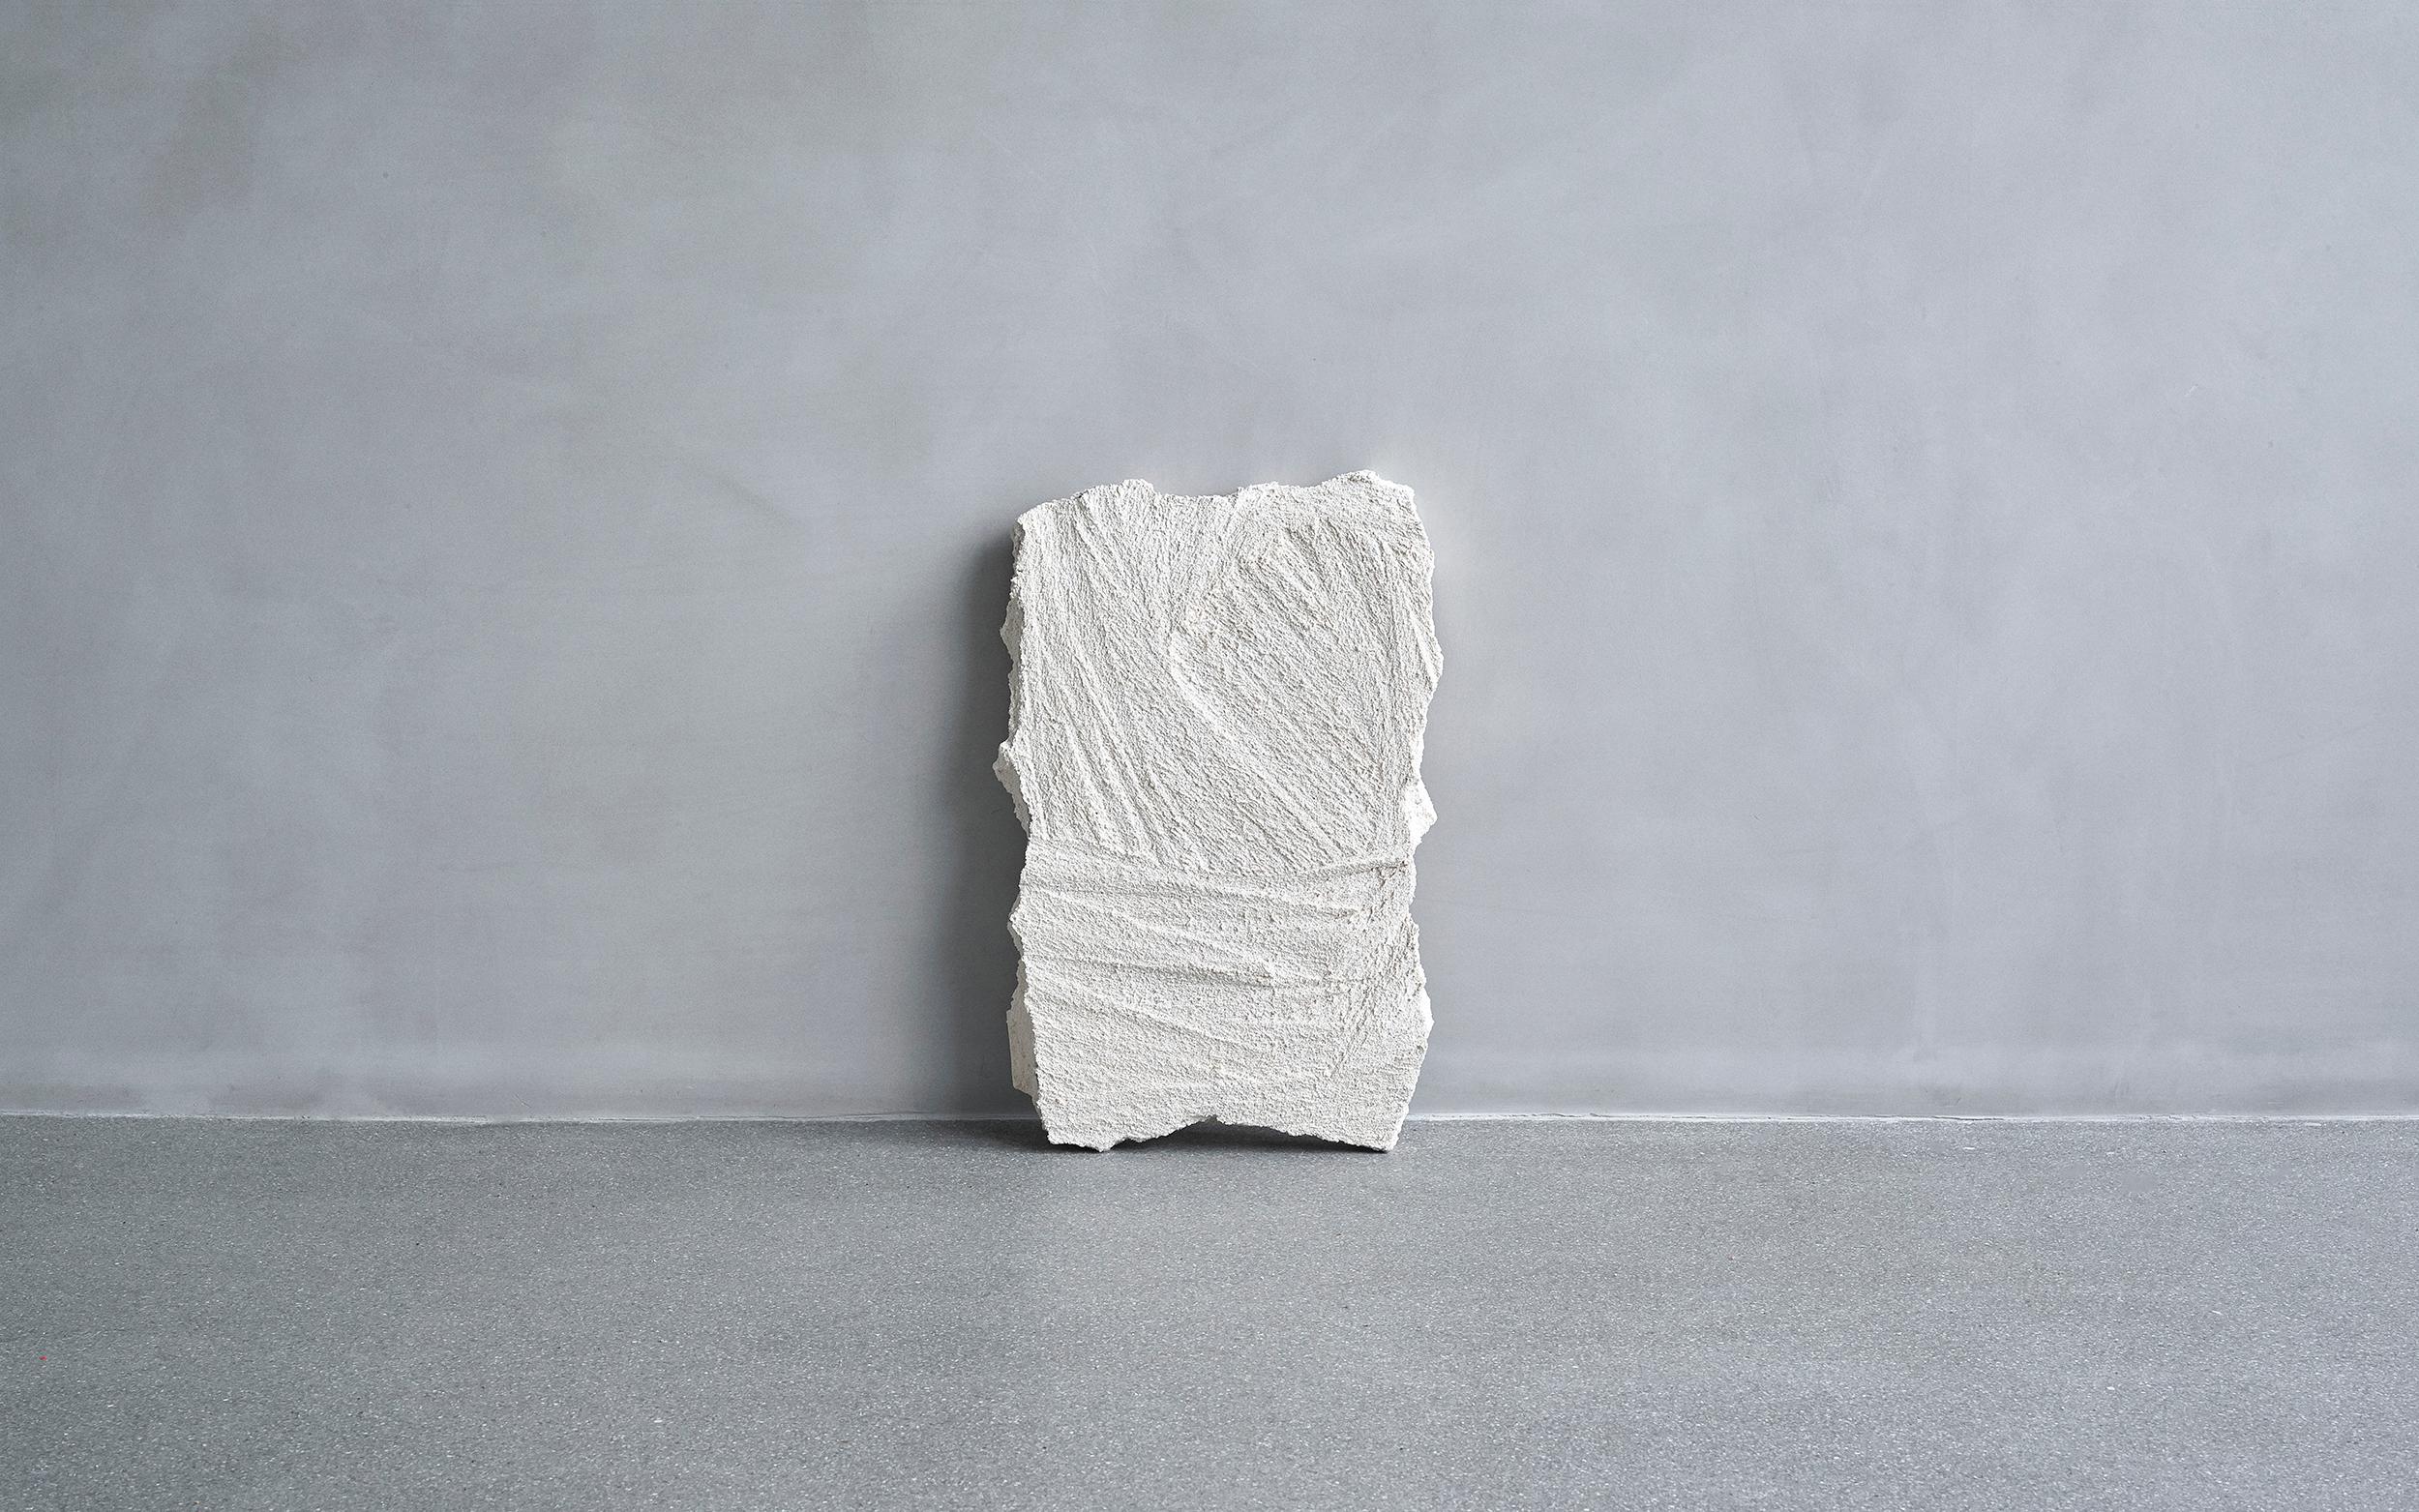 Rock pond wall piece by Andredottir & Bobek
Dimensions: W 320 x H 450 cm
Materials: Reused Foam/mattress and Jesmontite Hardner in Color Grey

Artificial Nature is a collaboration between the artist and design duo Josephine Andredottir and